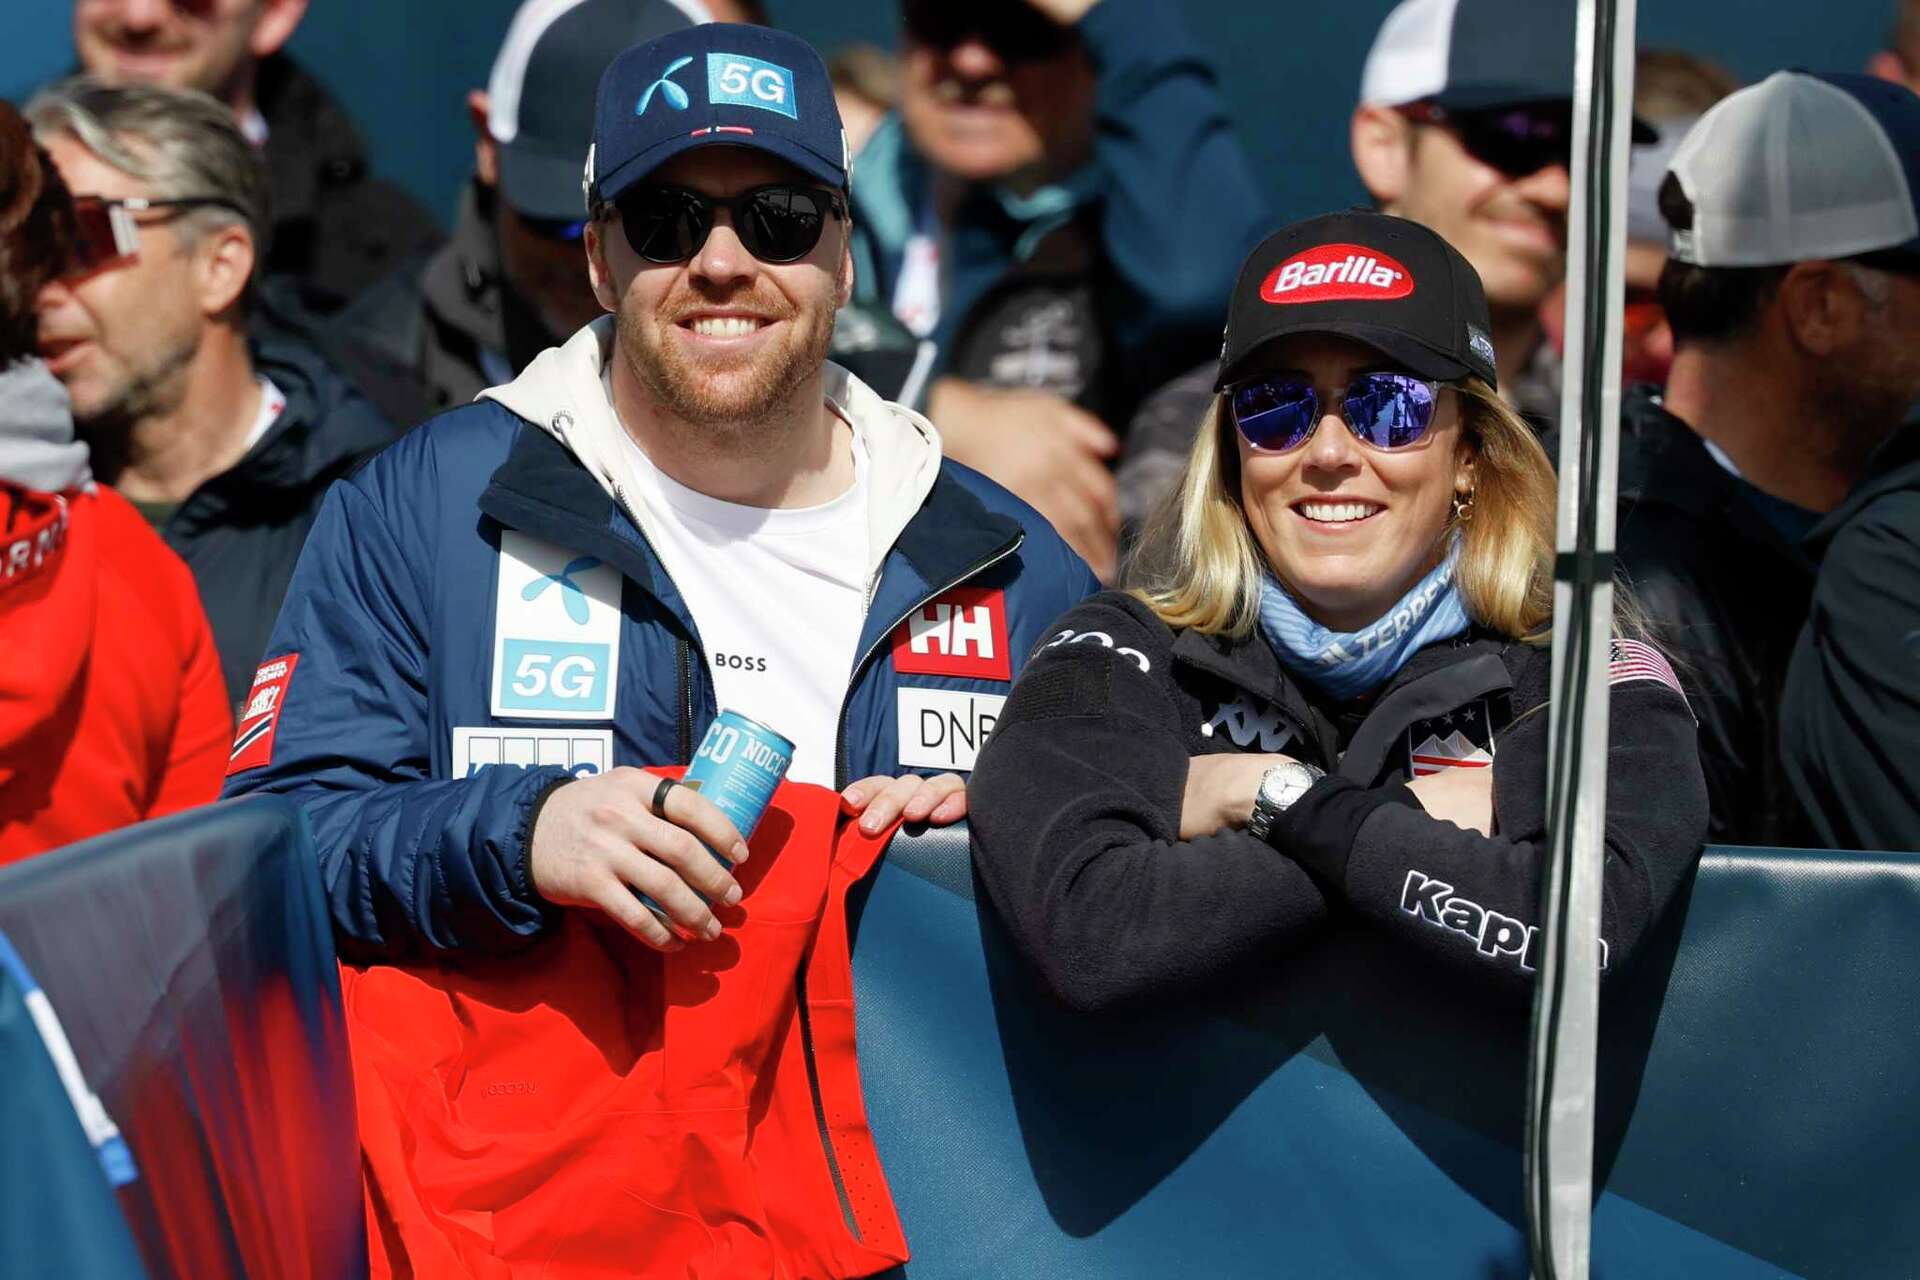 Mikaela Shiffrin and Aleksander Aamodt Kilde announce their engagement